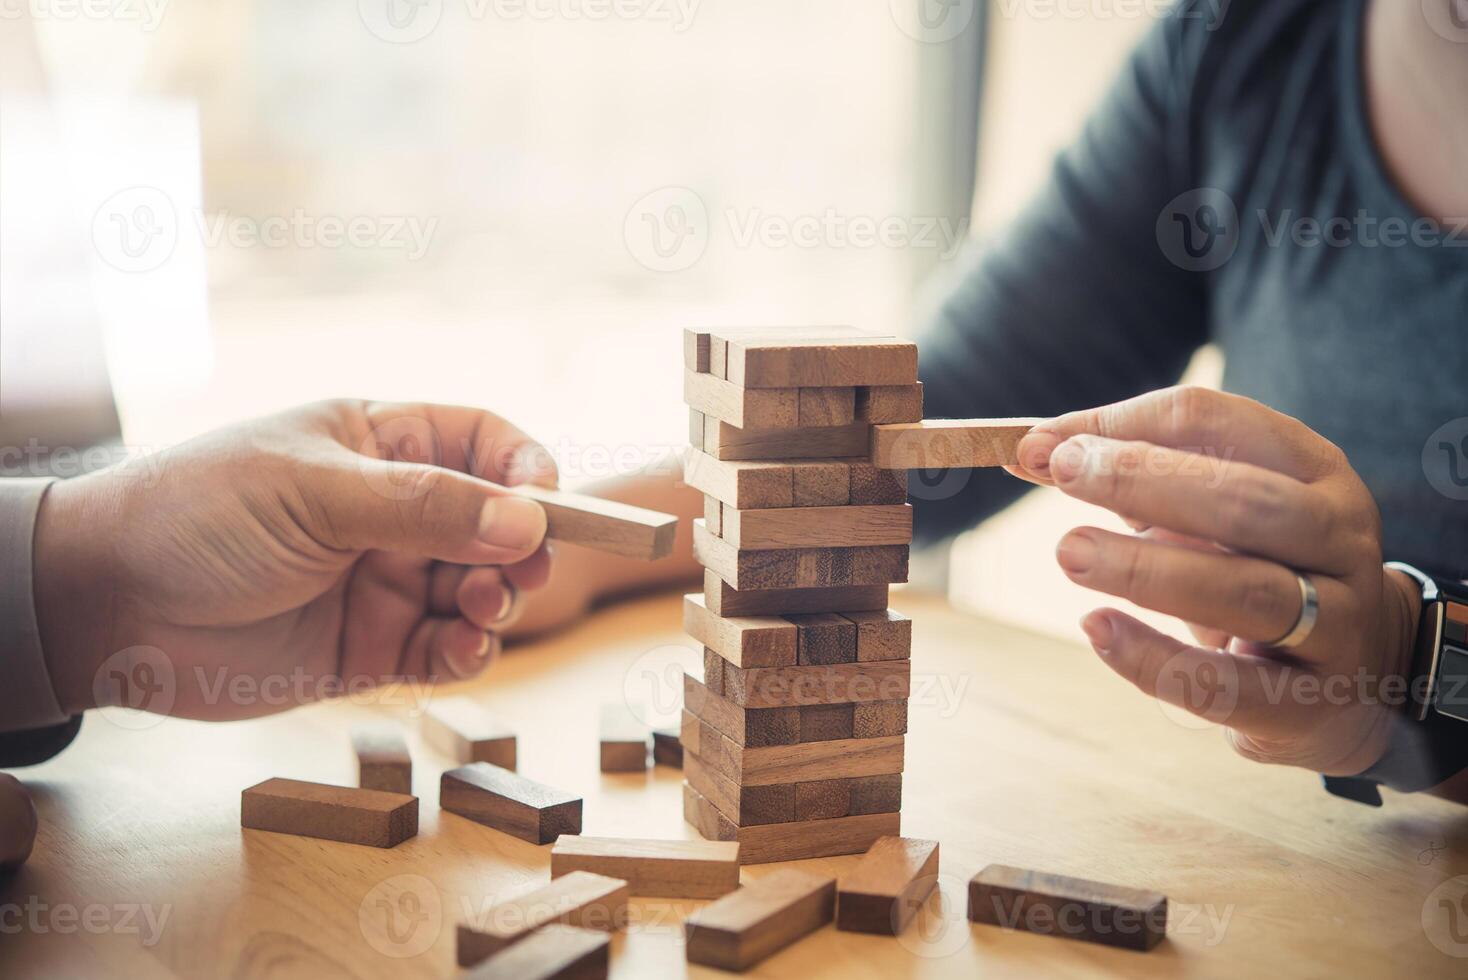 Business risks in the business. Requires planning Meditation must be careful in deciding to reduce the risk in the business. As the game drew to a wooden block from the tower photo